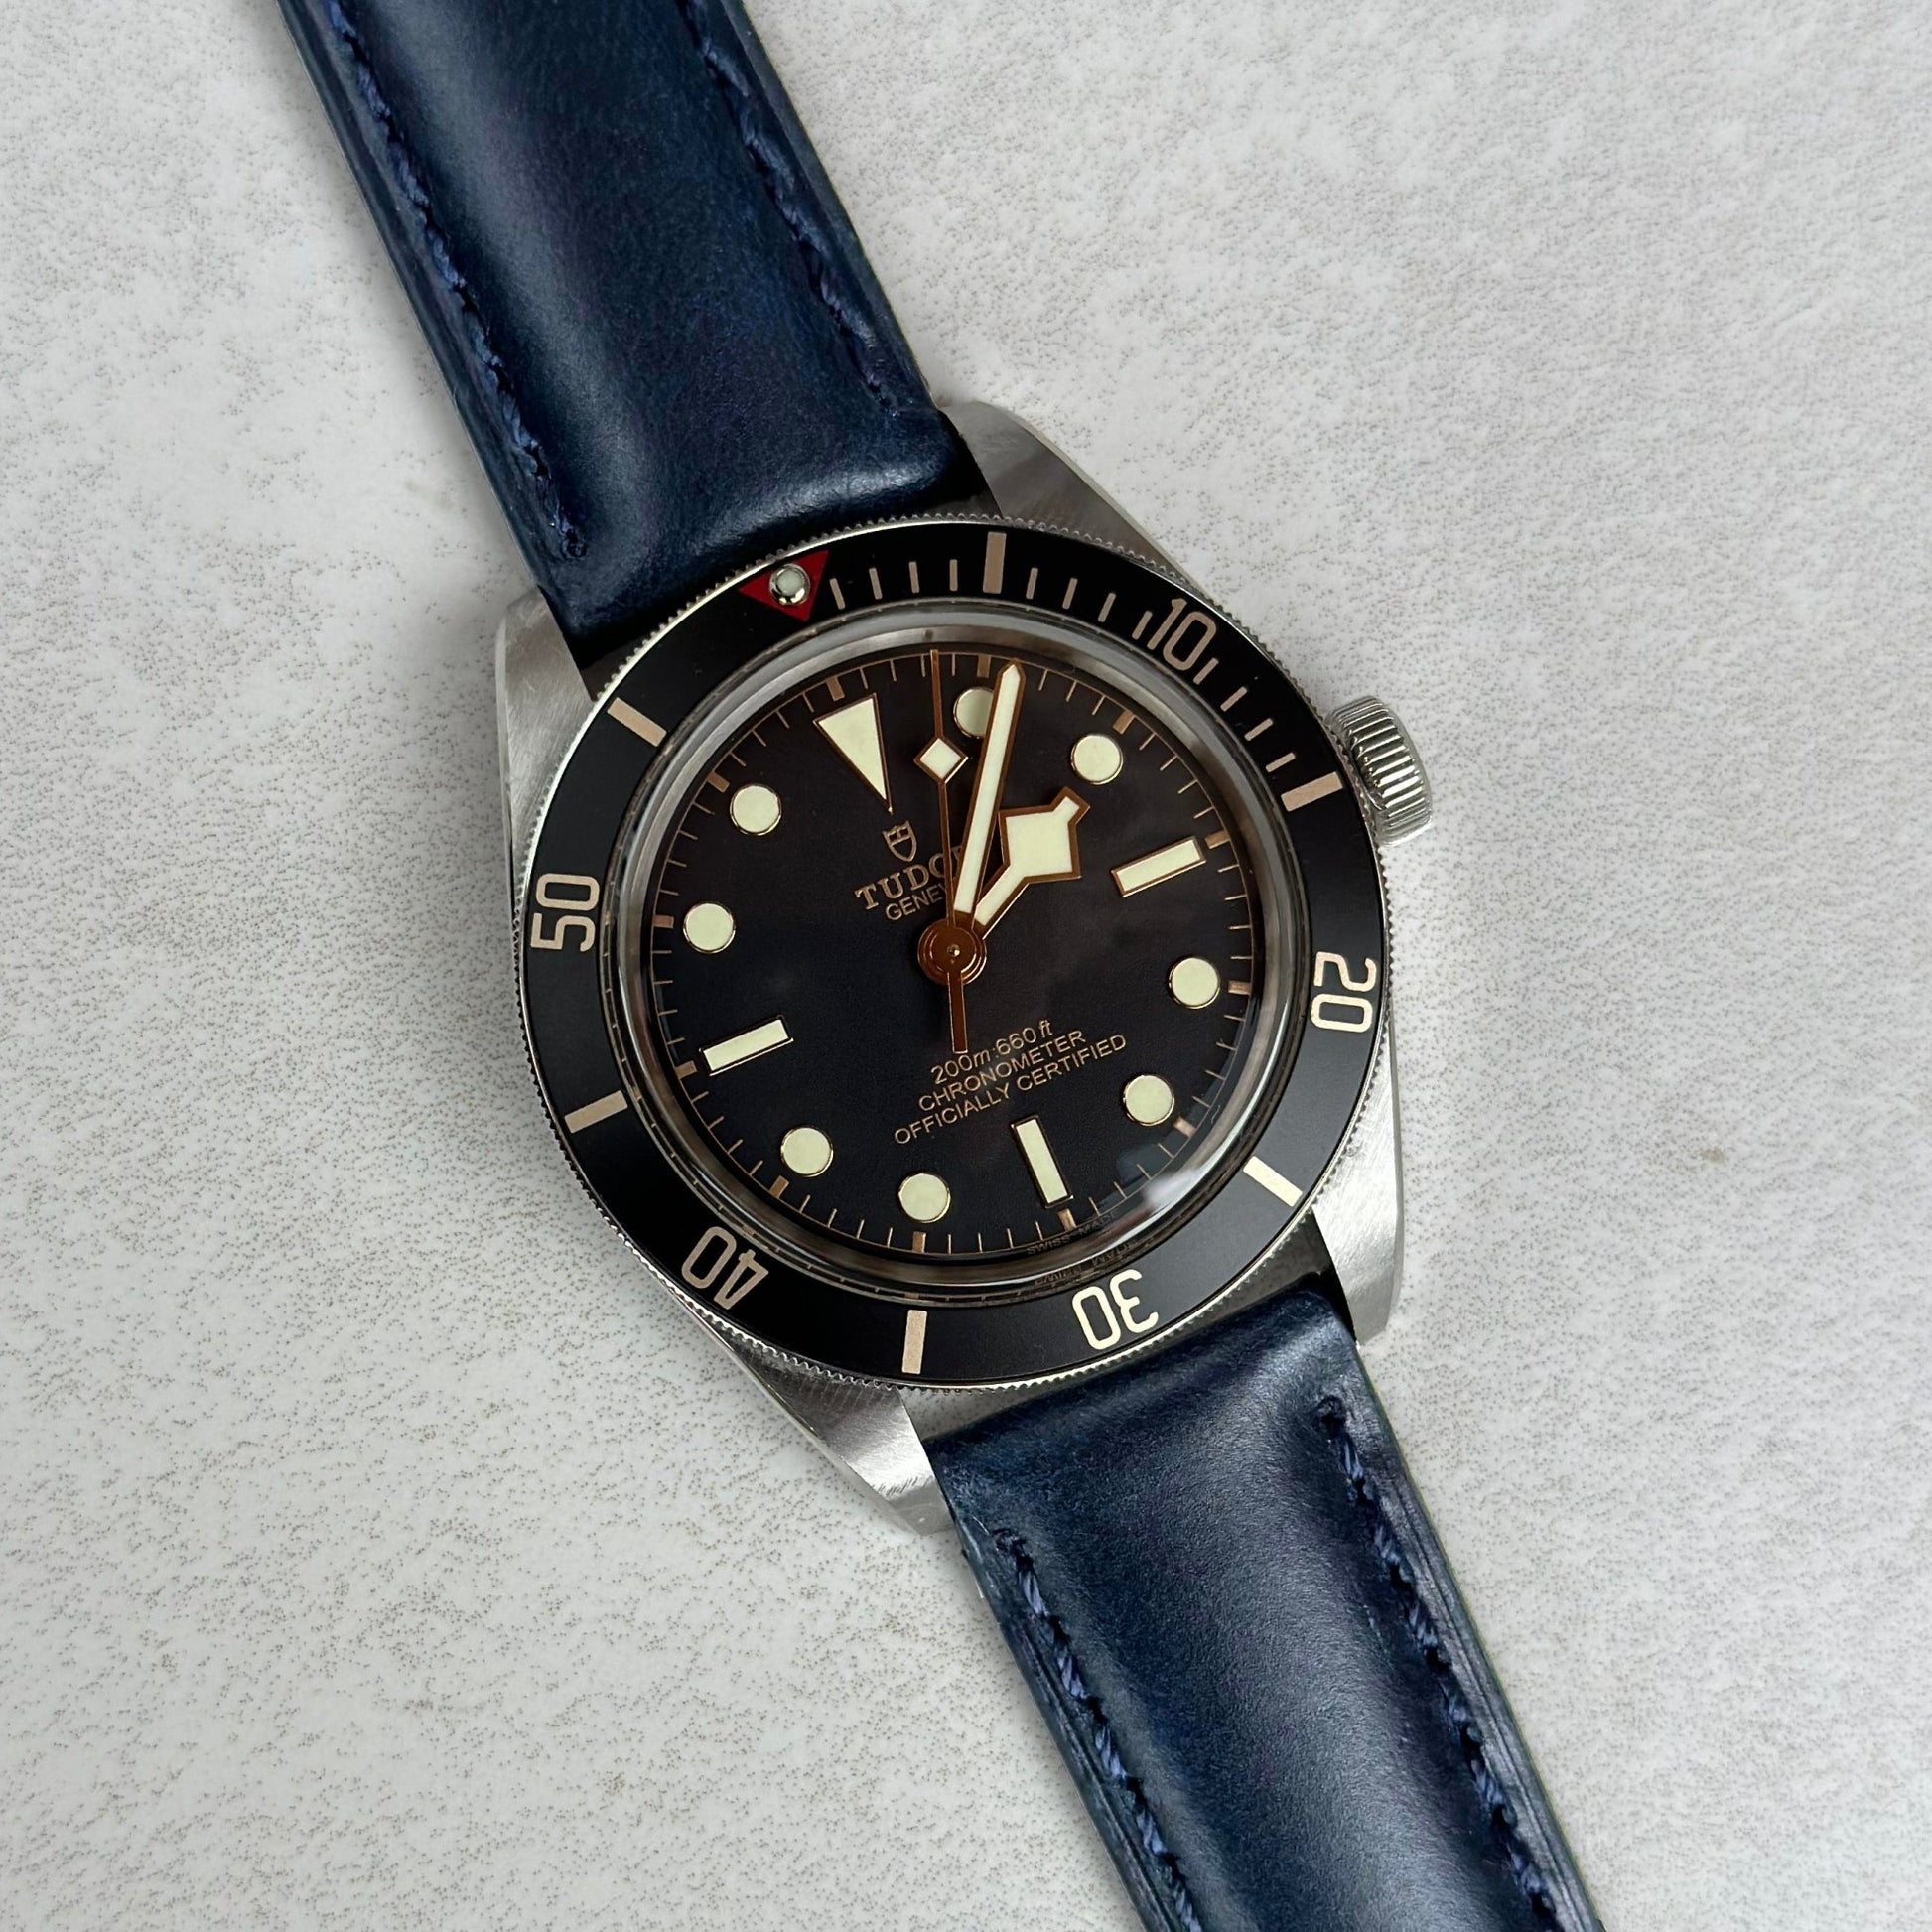 Deep ocean blue full grain leather watch strap on the Tudor Blackbay 58. Padded leather watch strap. Watch And Strap